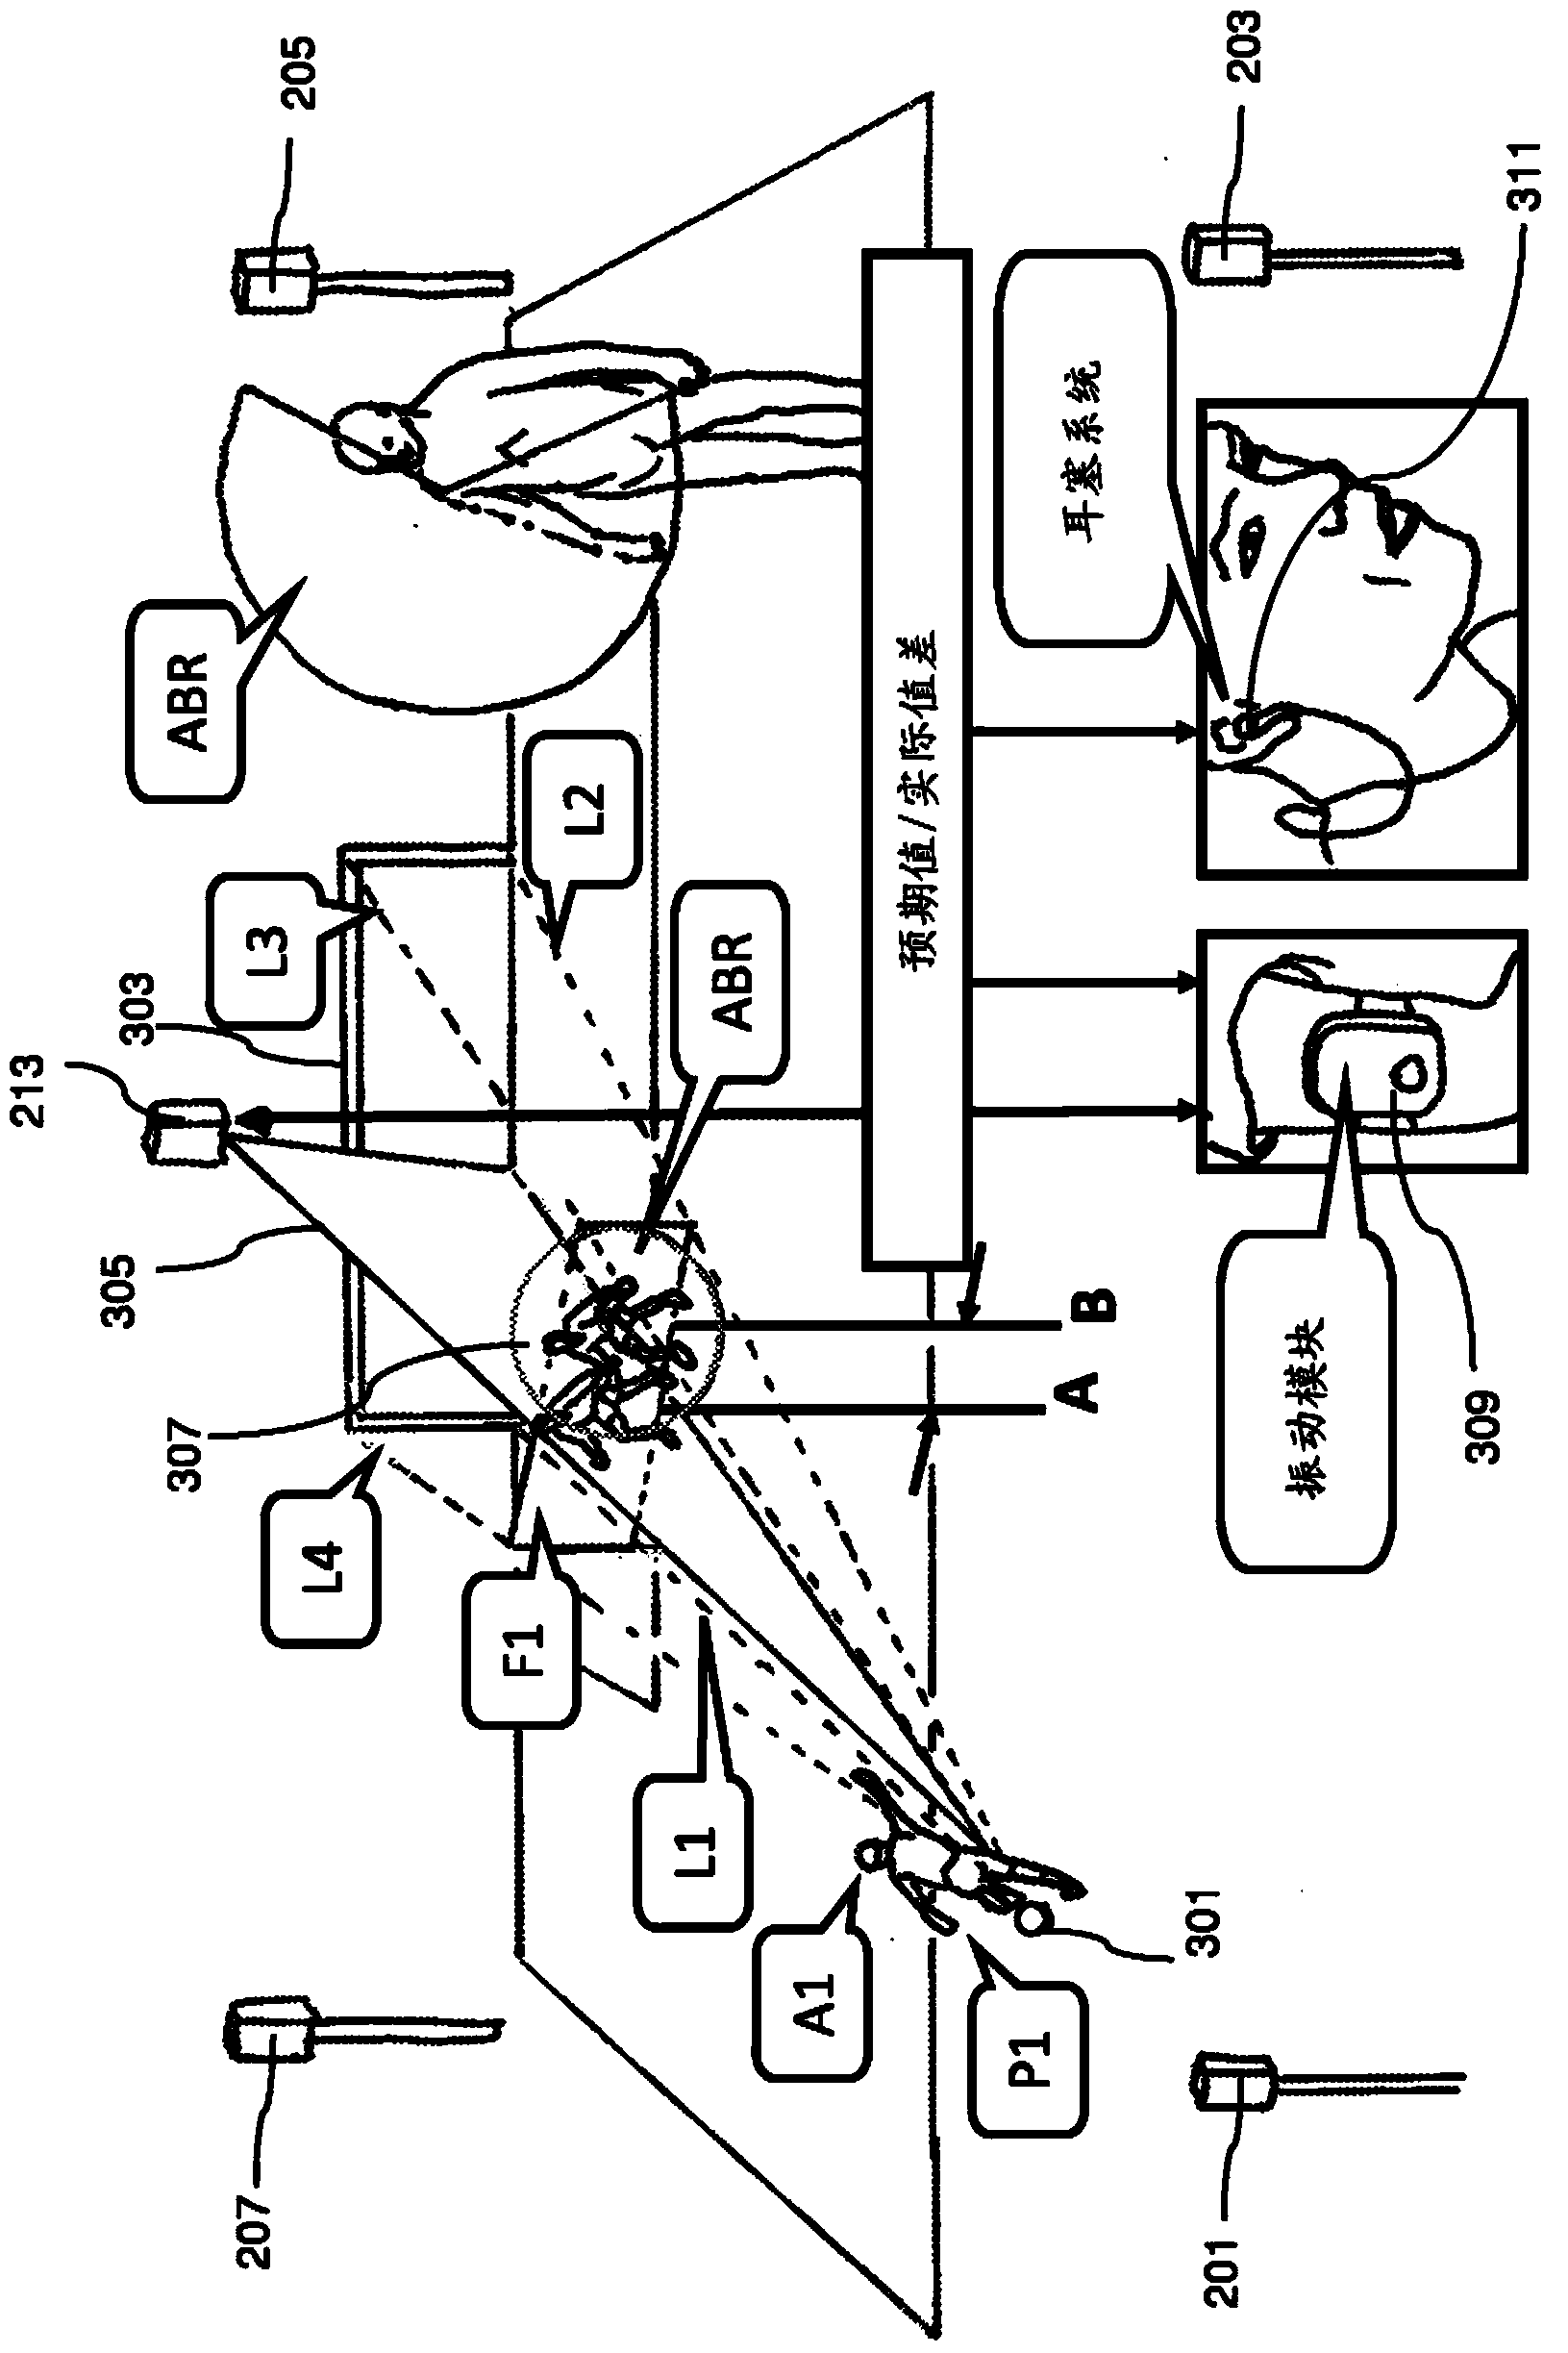 System and method for supporting an exercise movement